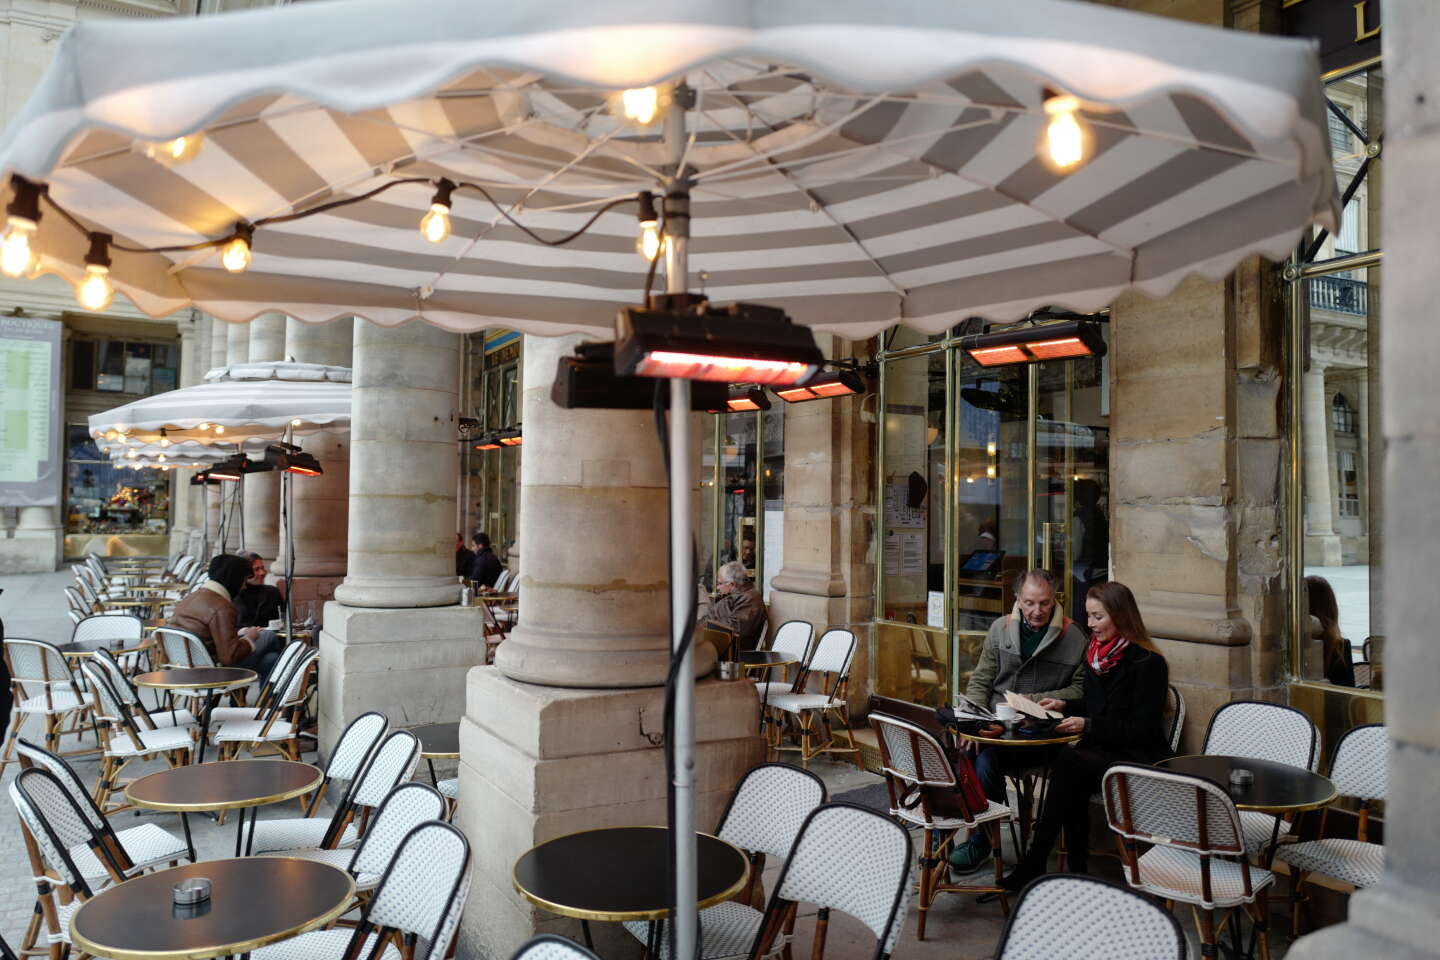 In Paris, the town hall juggles between pedagogy and fines to eradicate heating on the terrace